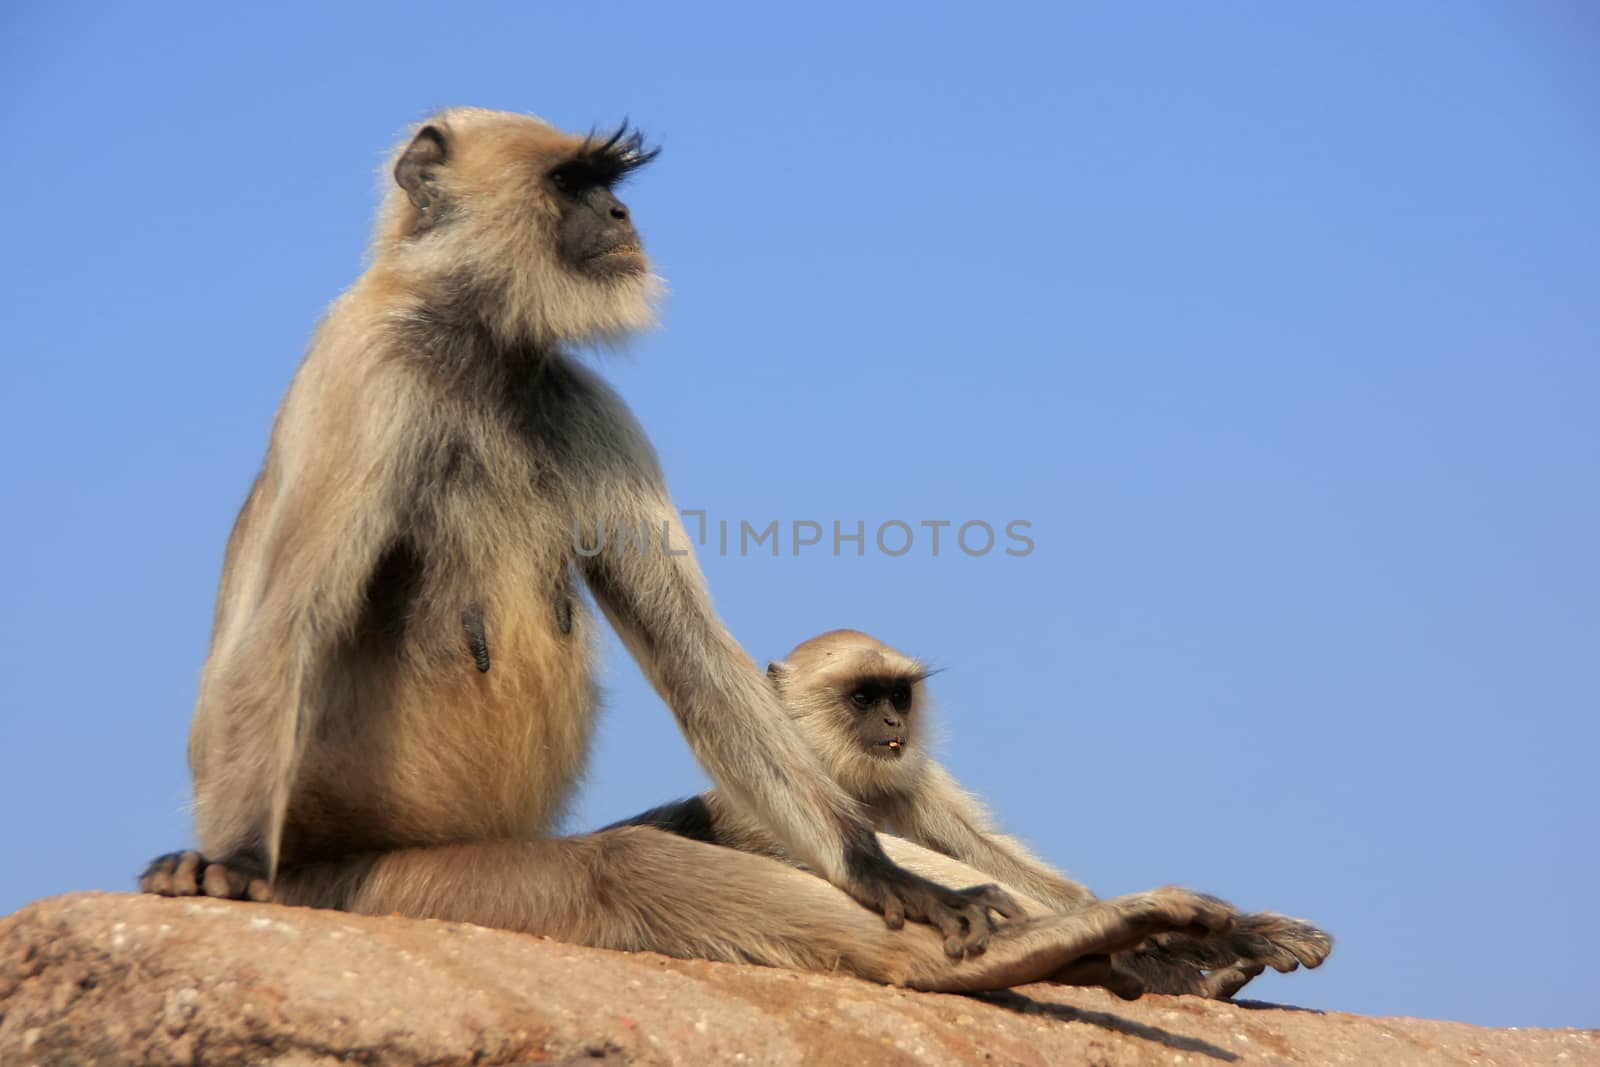 Gray langur (Semnopithecus dussumieri) with a baby sitting at Ra by donya_nedomam